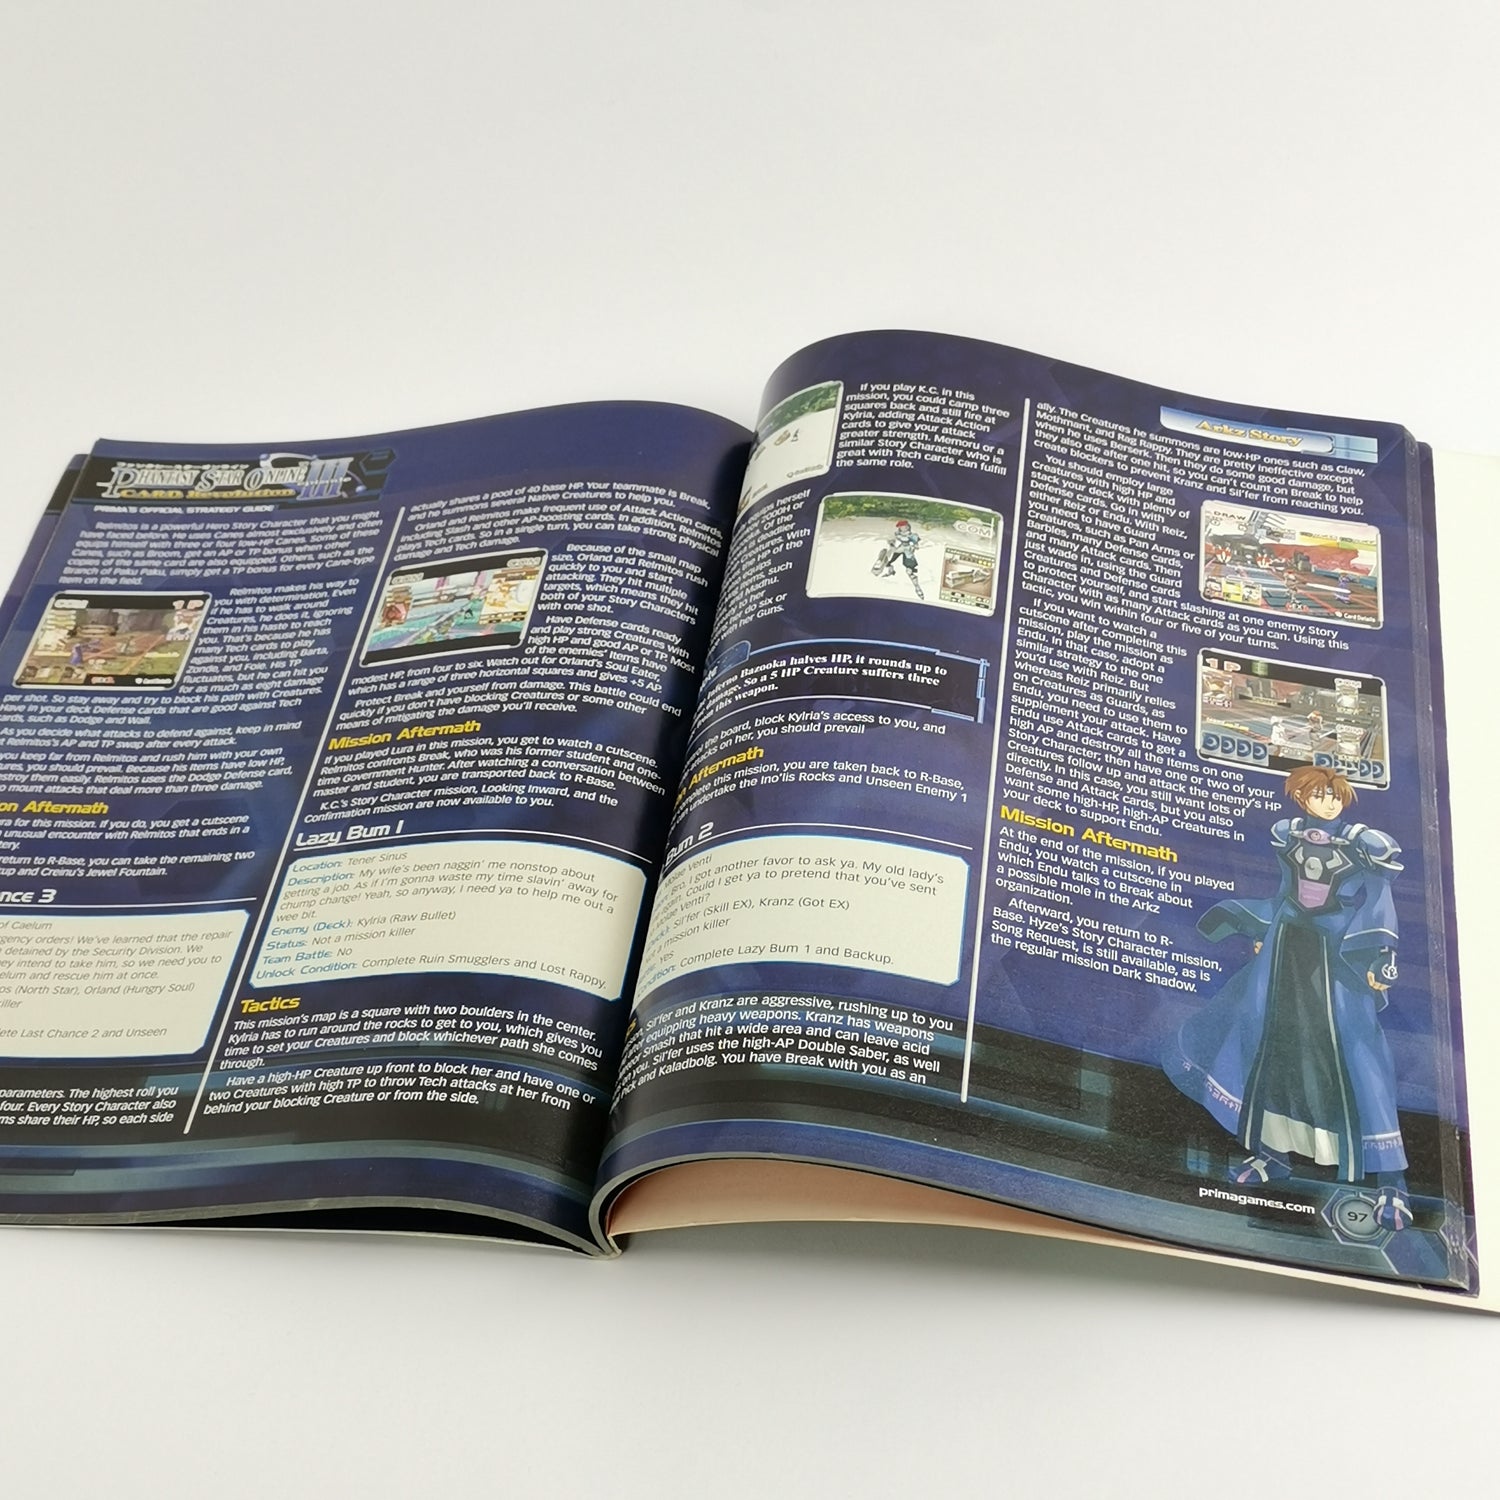 Prima's Official Strategy Guide: Phantasy Star Online Episode III - Gamecube